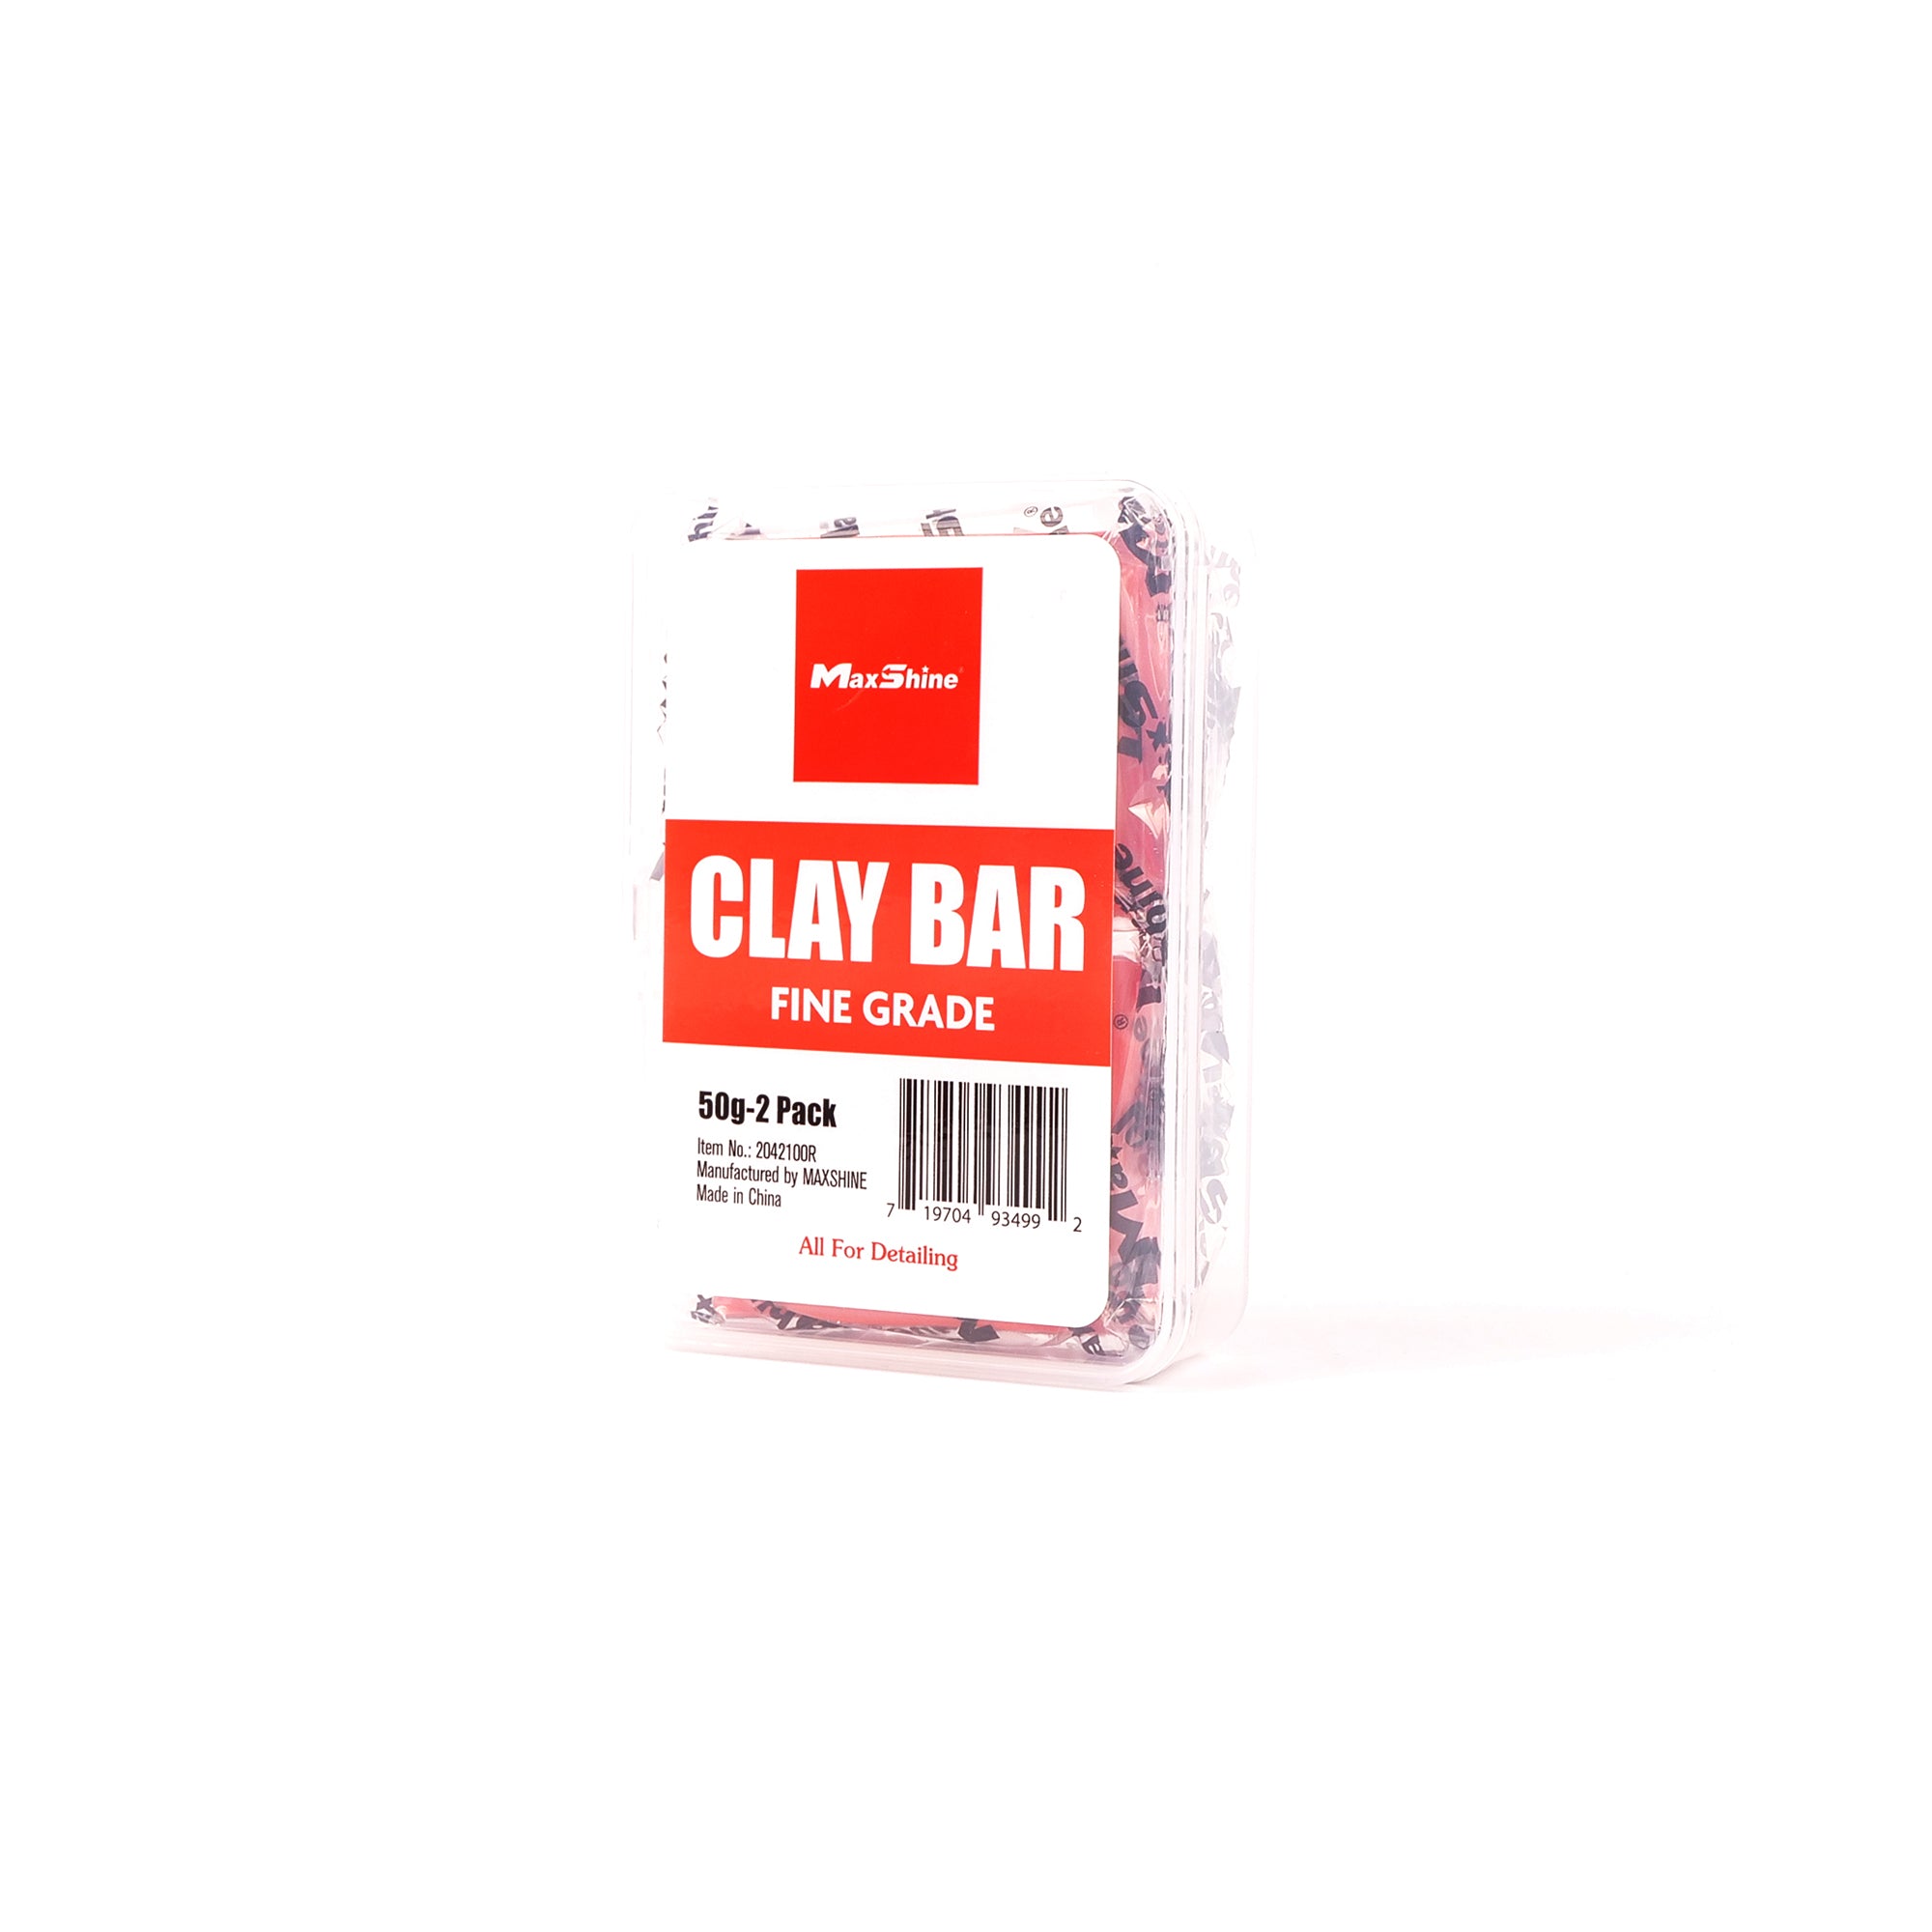 Clay bar mitt  Buy clay bar for car paint products online at carcosmic